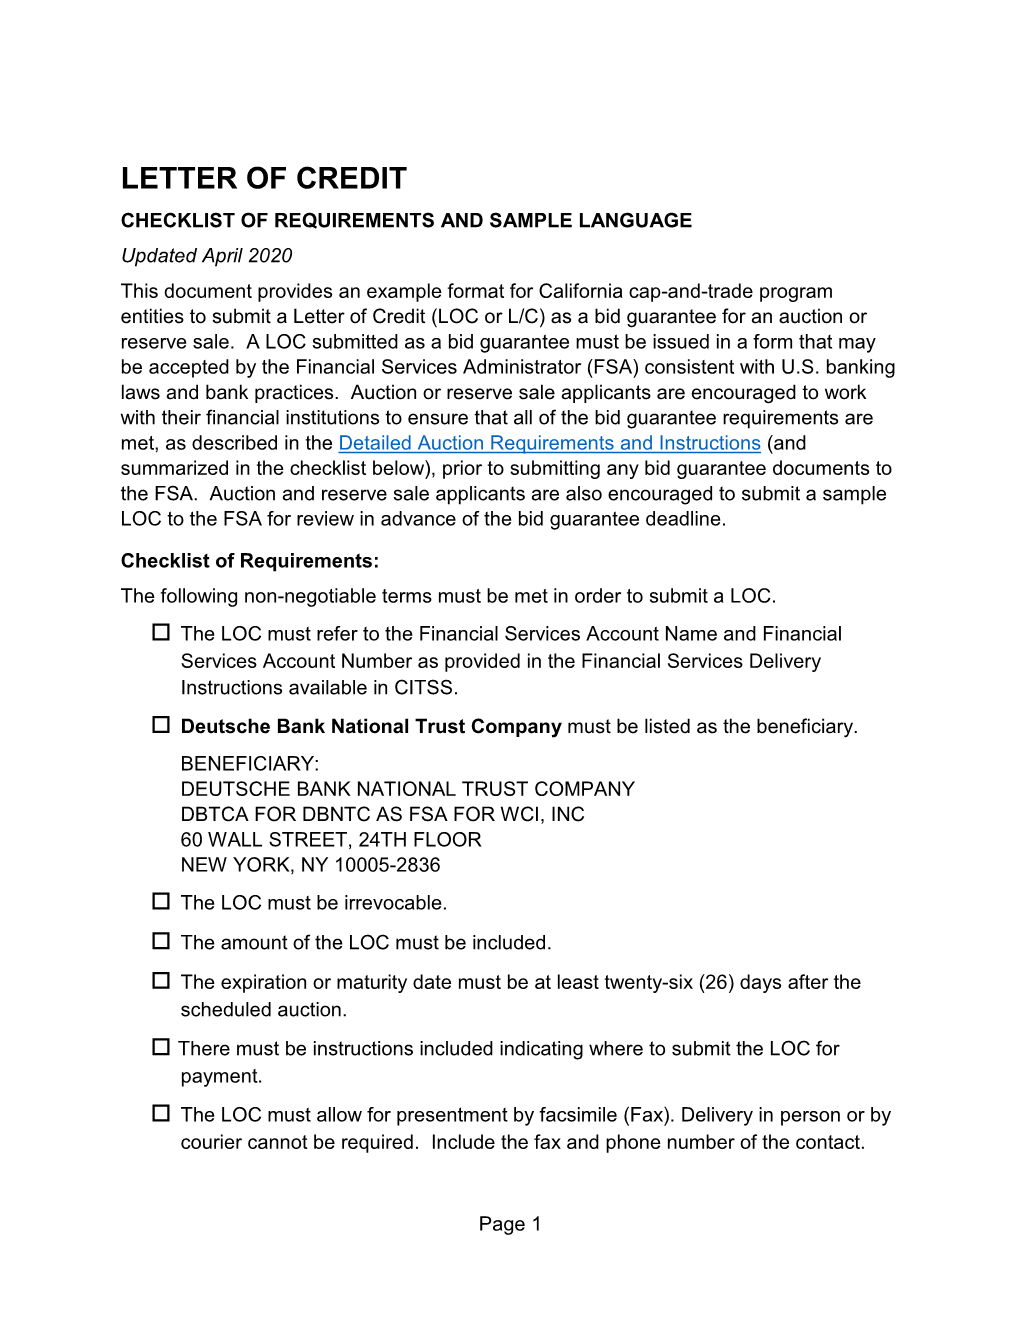 Example Letter of Credit Language to Submit a Bond As a Bid Guarantee